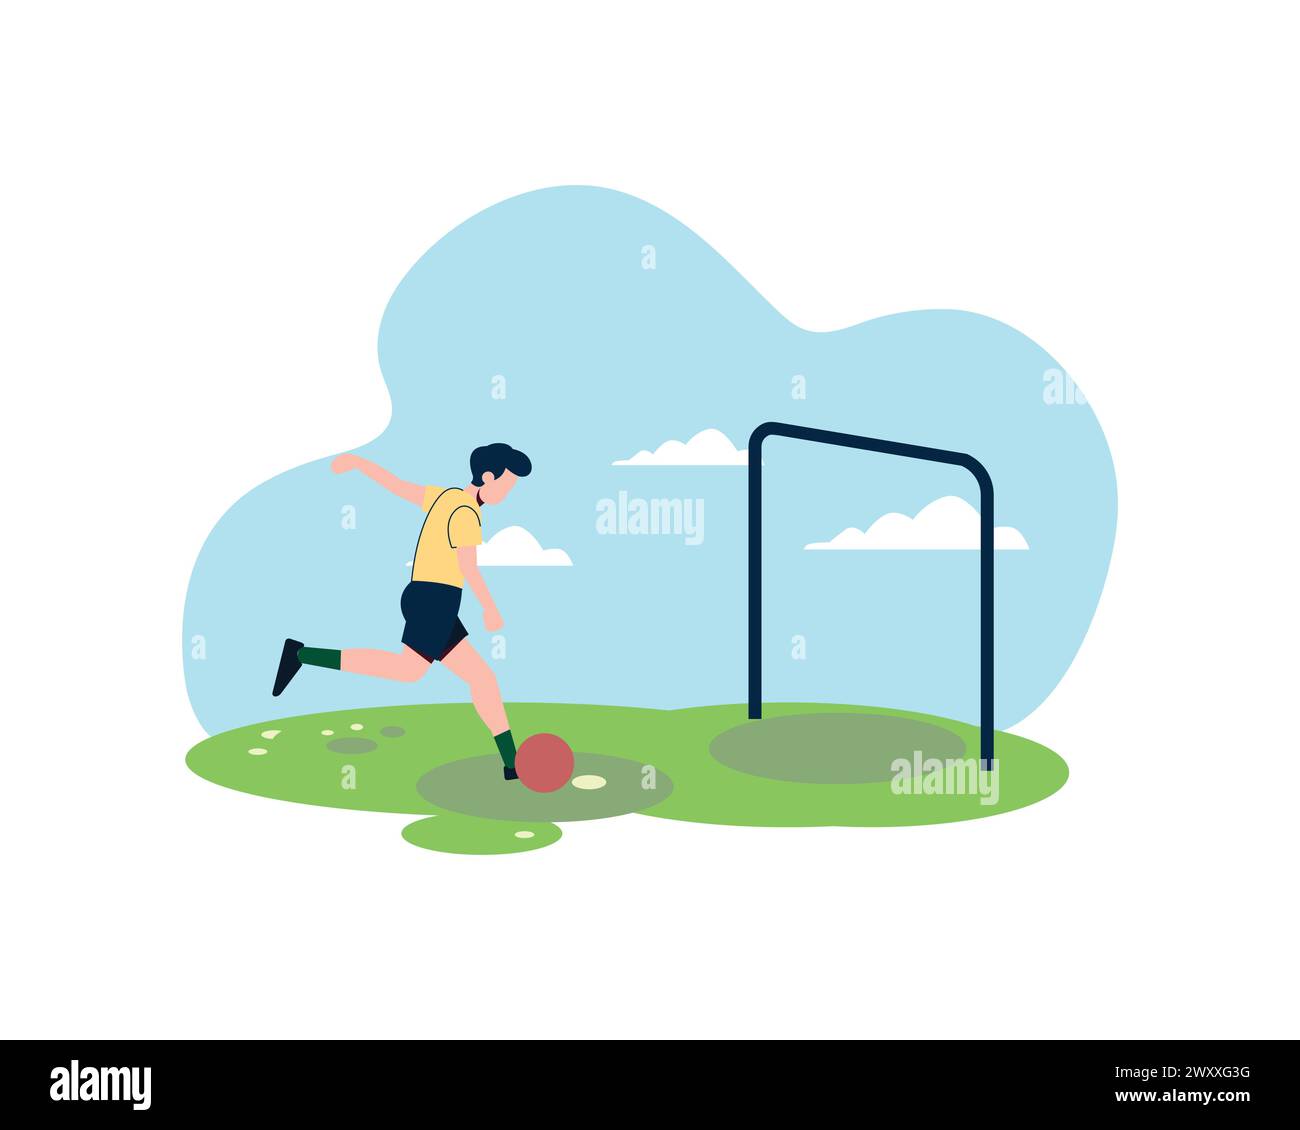 Soccer player kicking the ball to the goal. Simple flat design for active people in sport and healthy life concept. Stock Vector